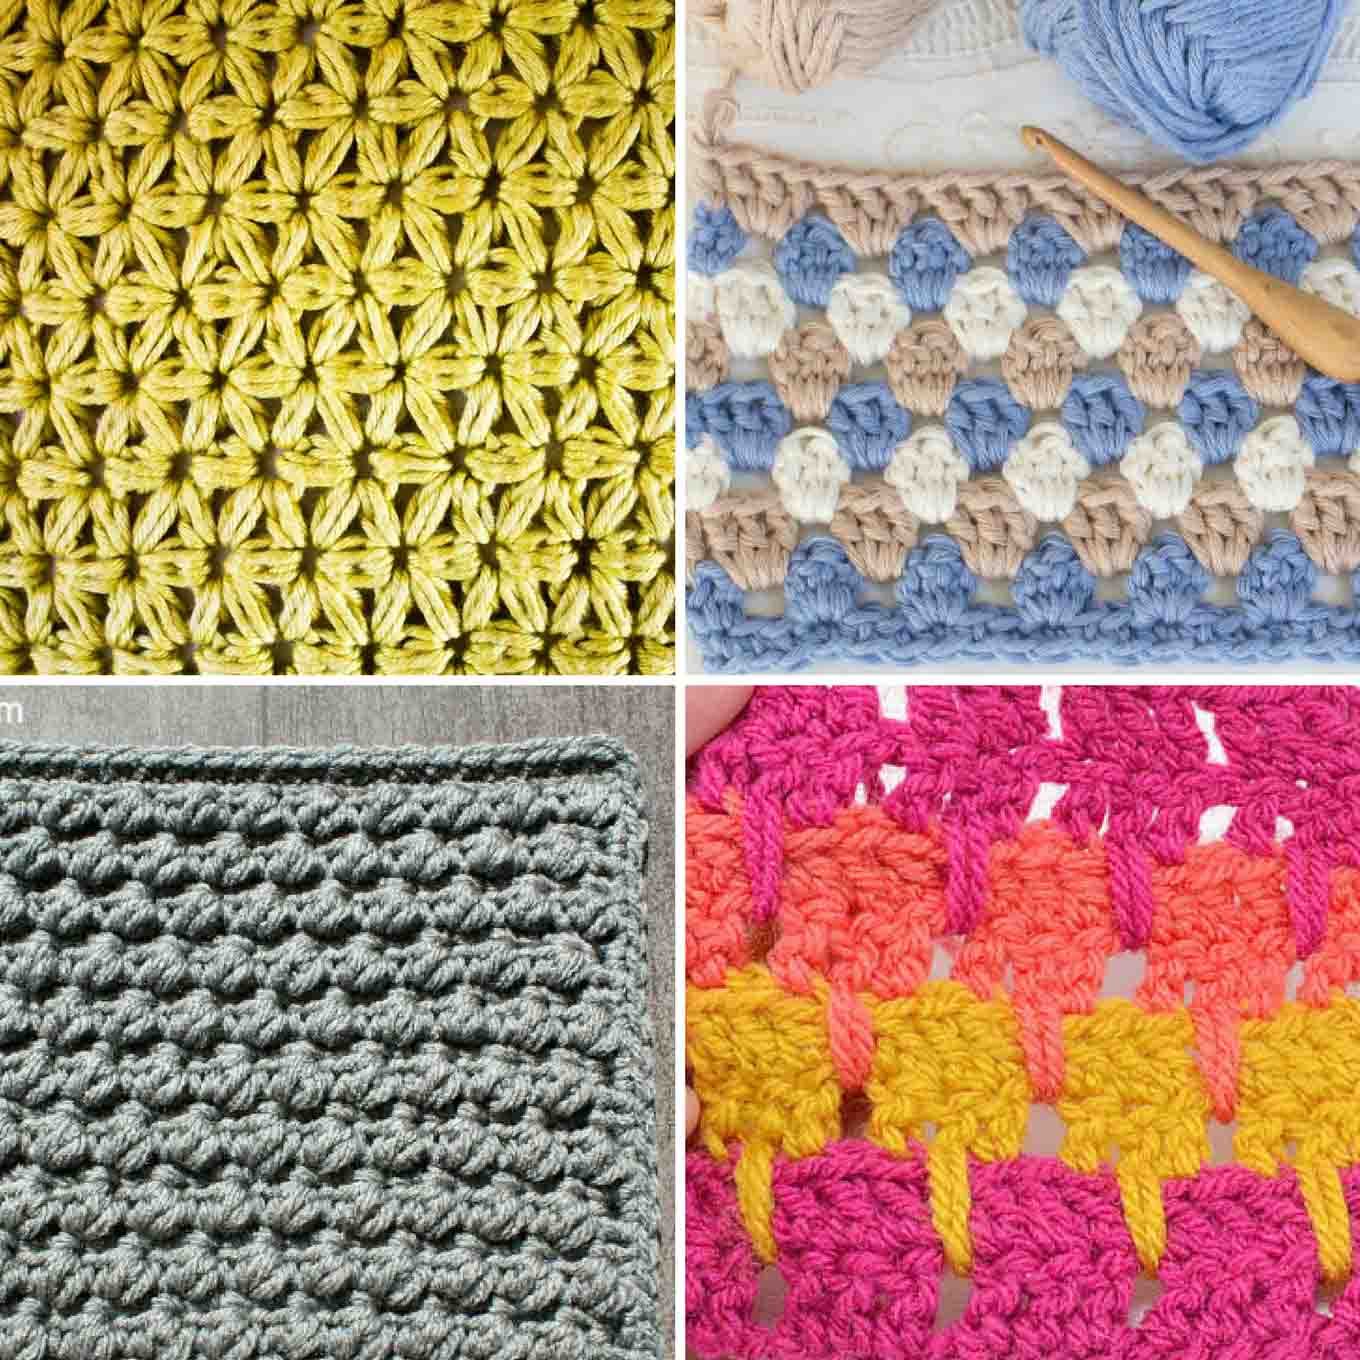 Different Stitches In Crochet - Craft and Crochet